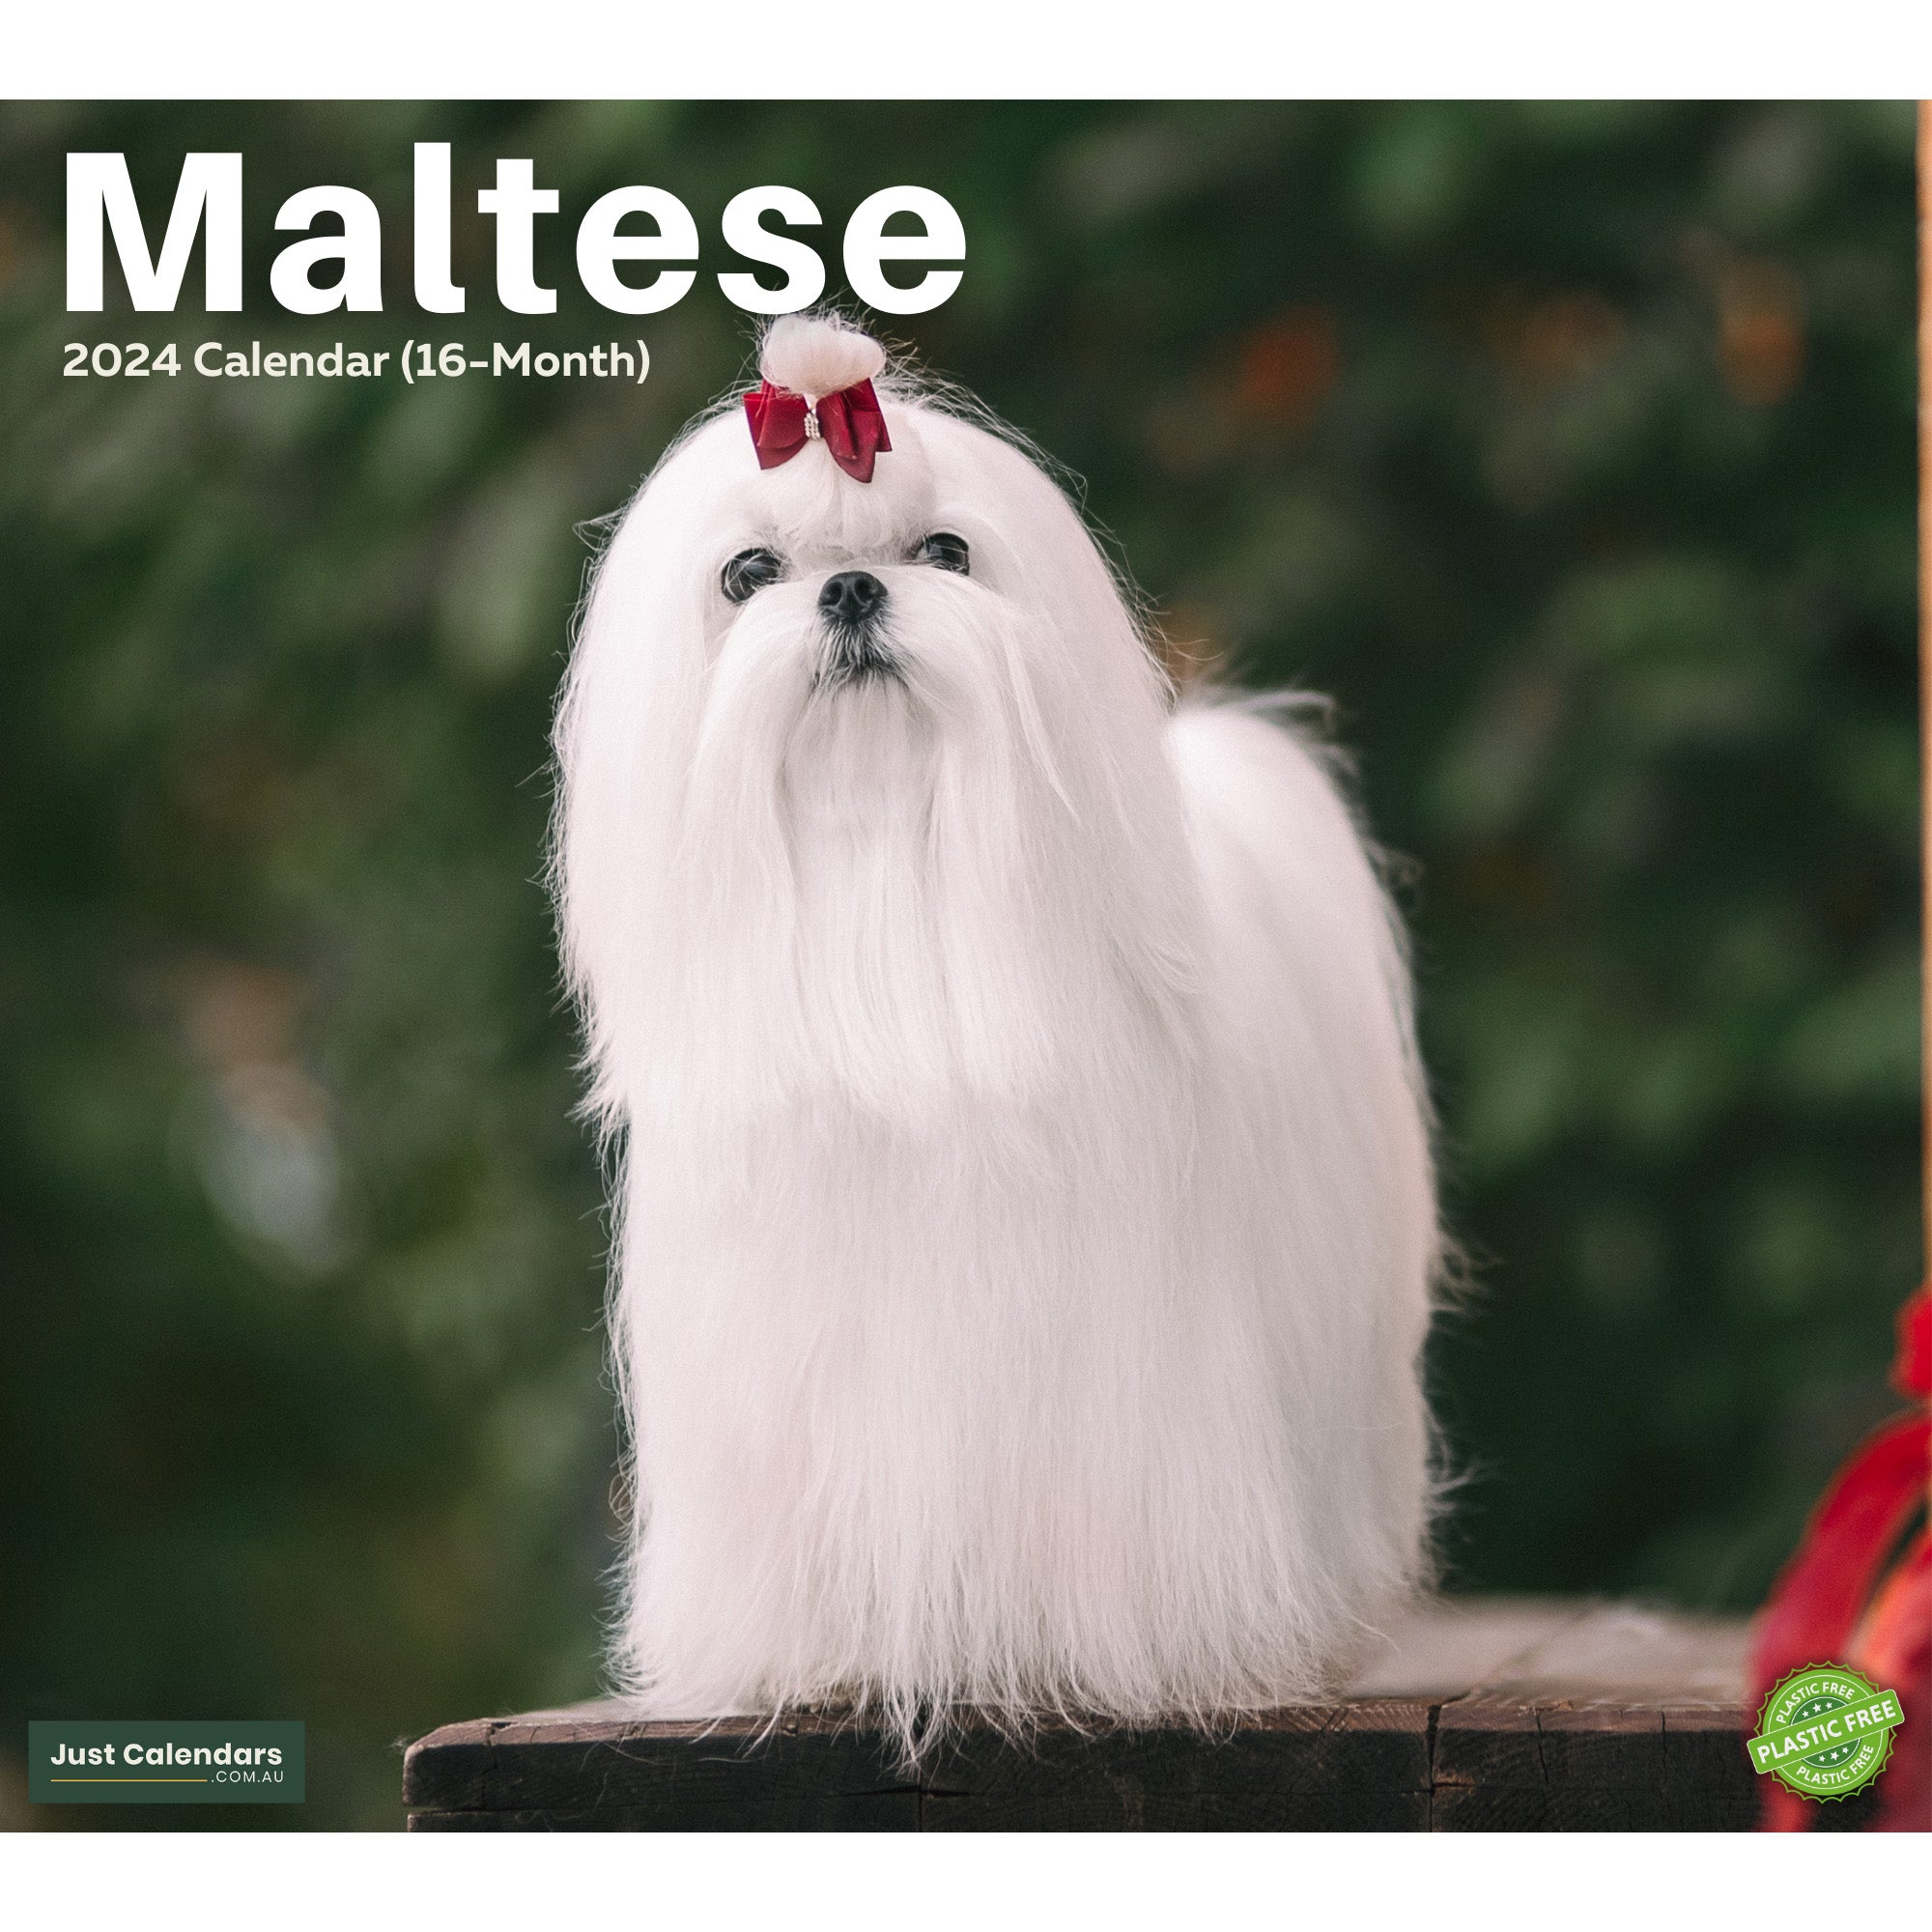 2024 Maltese Dogs & Puppies - Deluxe Wall Calendar by Just Calendars - 16 Month - Plastic Free